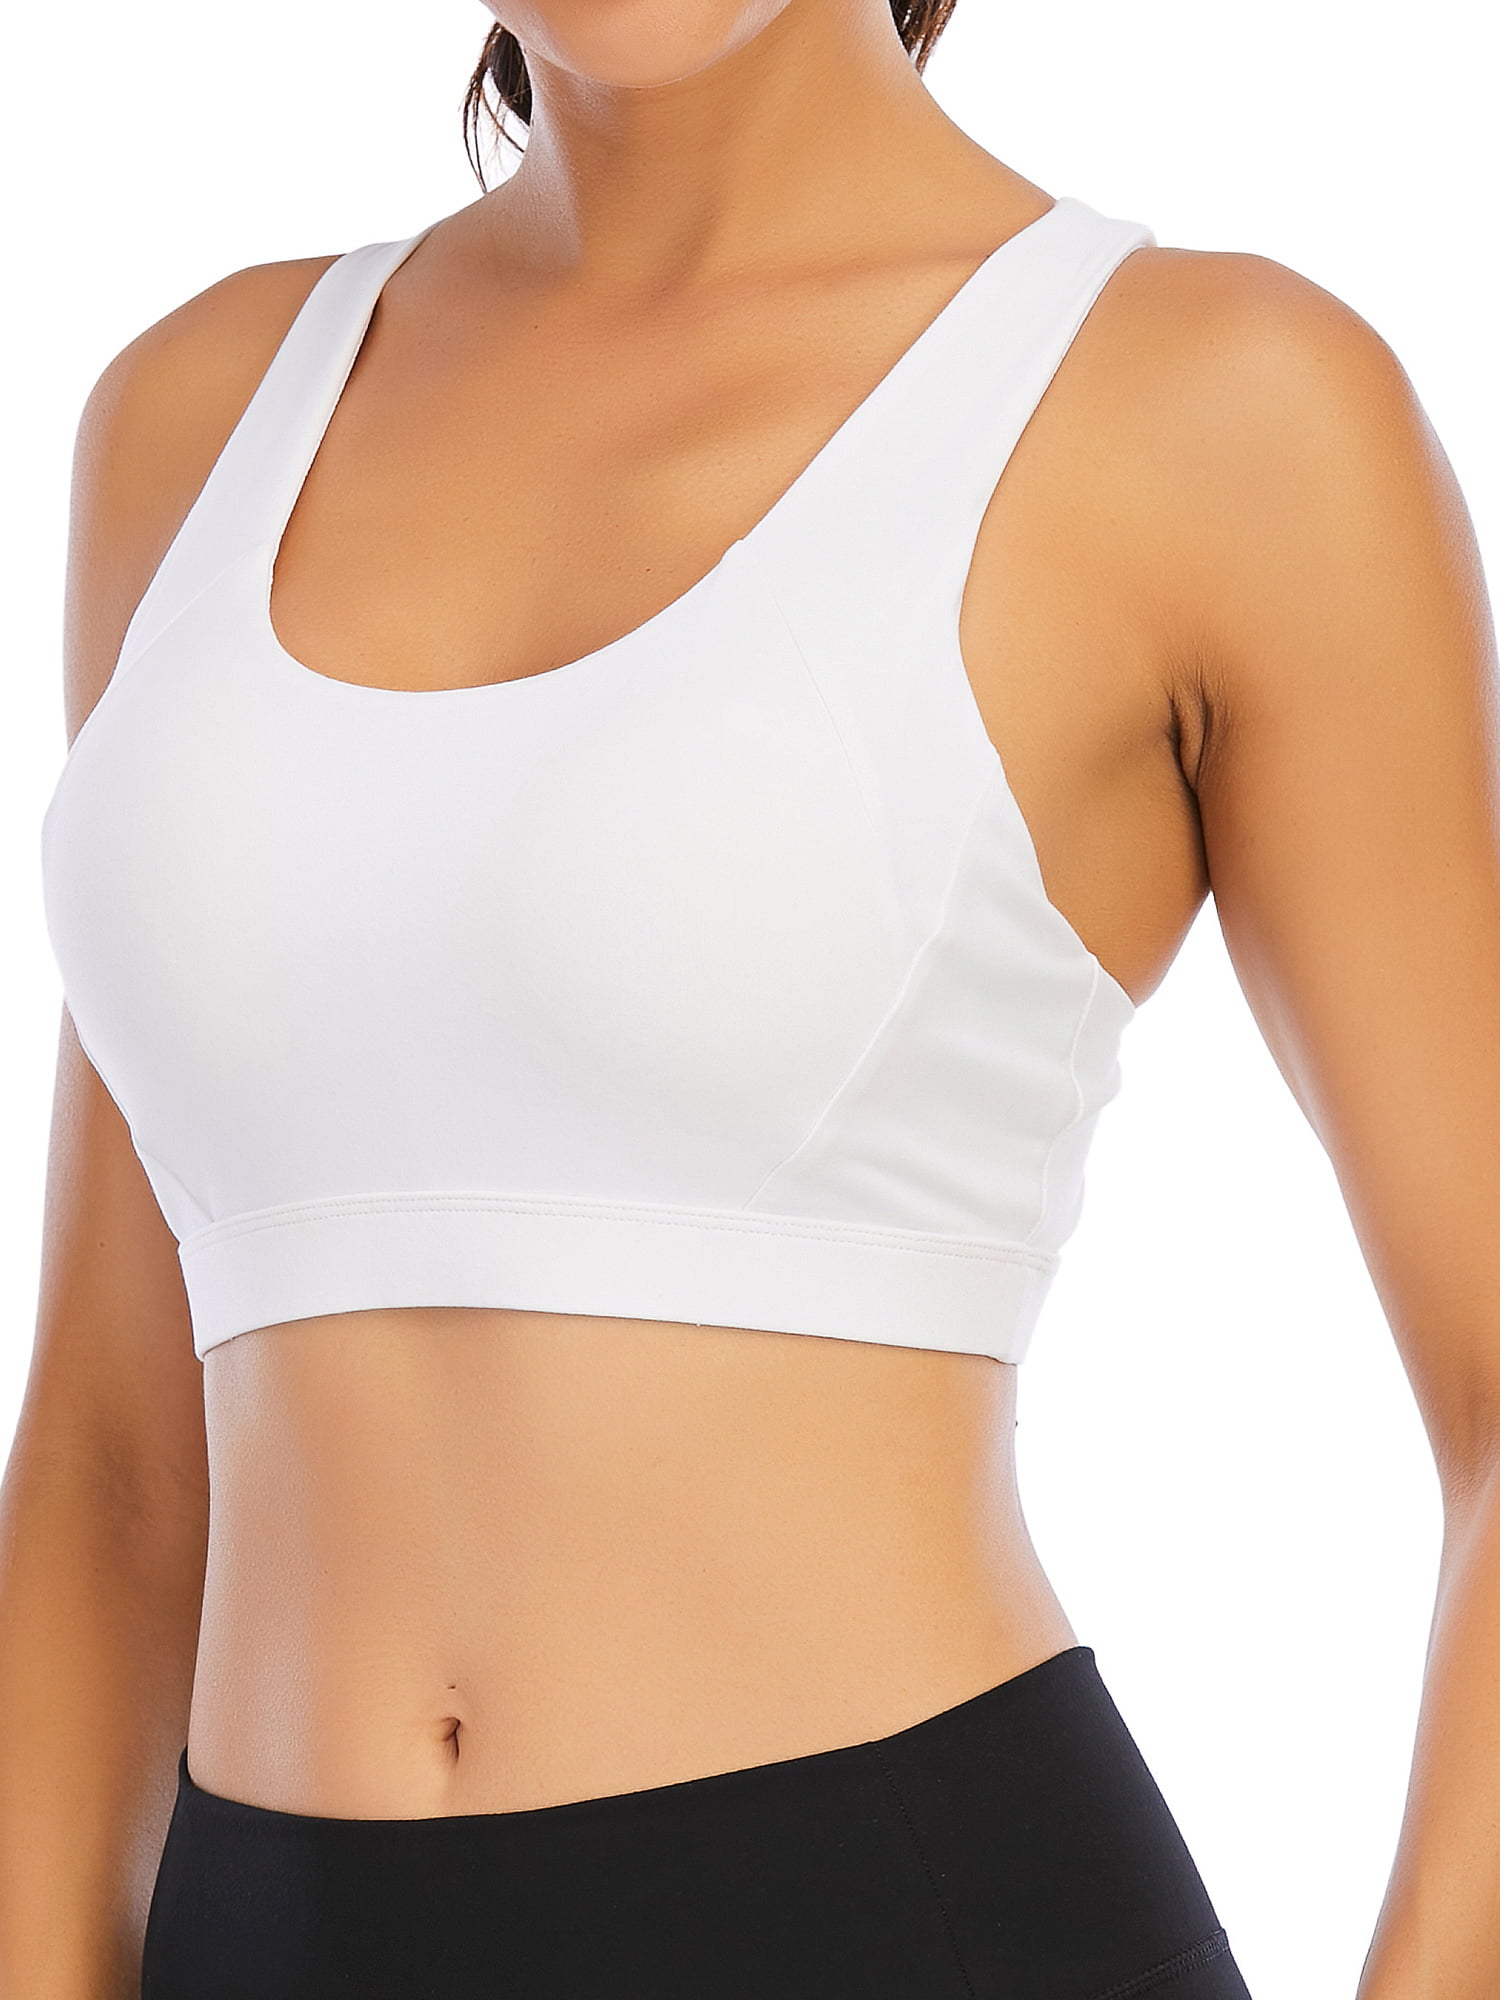 Youloveit Sports Bras for Women Padded Longline Yoga Cami Crop Tank Tops  with Built-in Bra(L,White) : Buy Online at Best Price in KSA - Souq is now  : Fashion